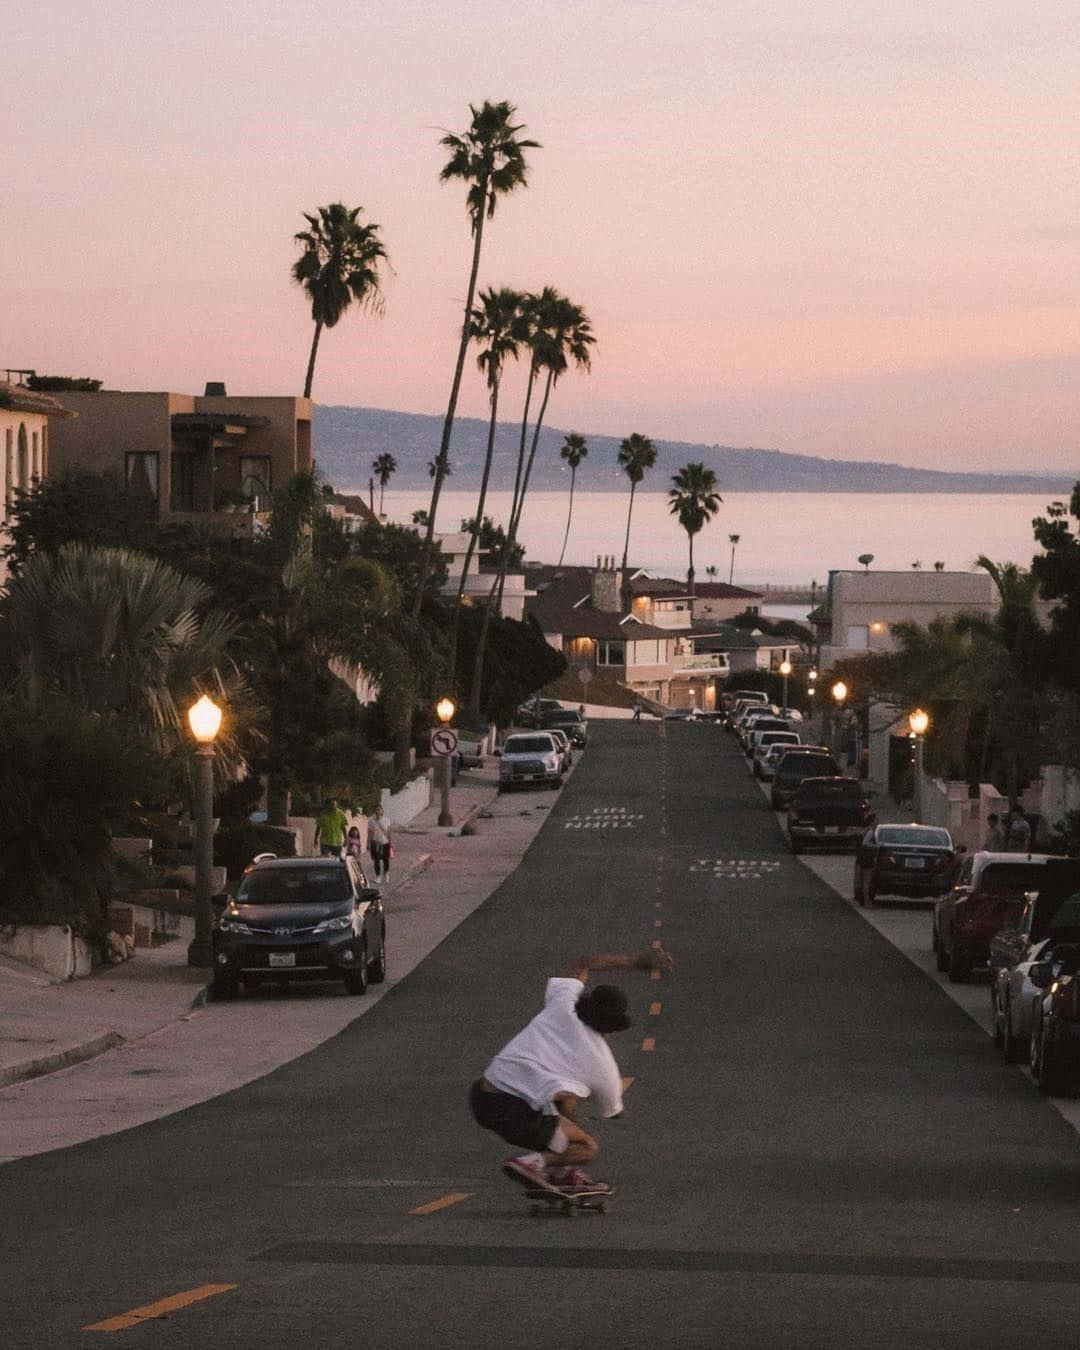 A Skateboarder Is Riding Down A Street